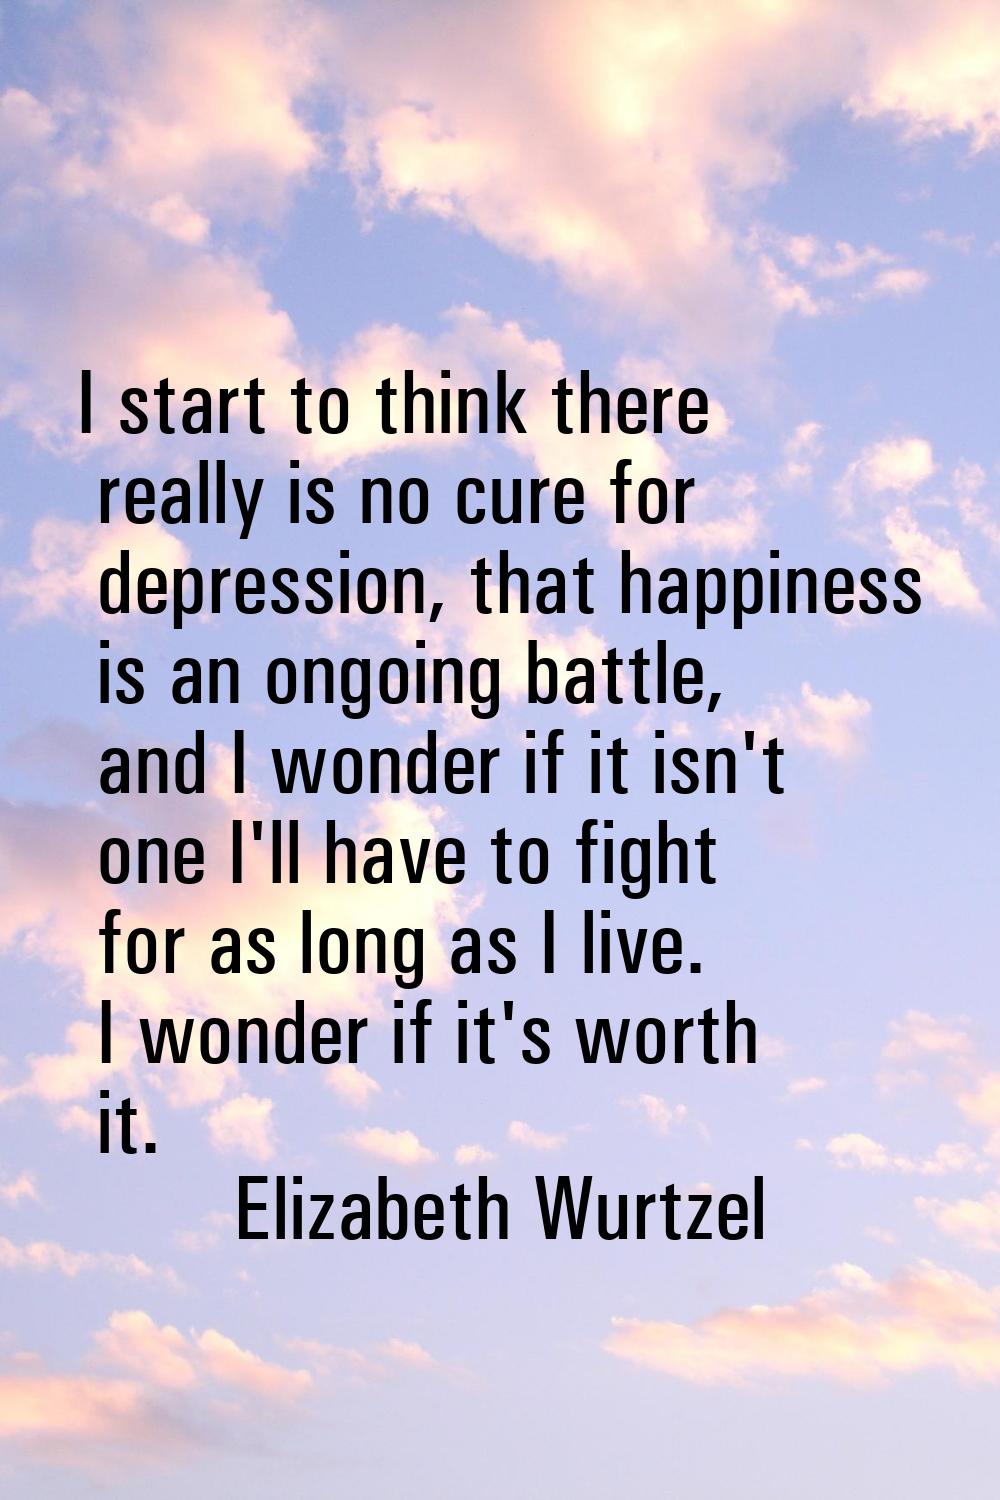 I start to think there really is no cure for depression, that happiness is an ongoing battle, and I